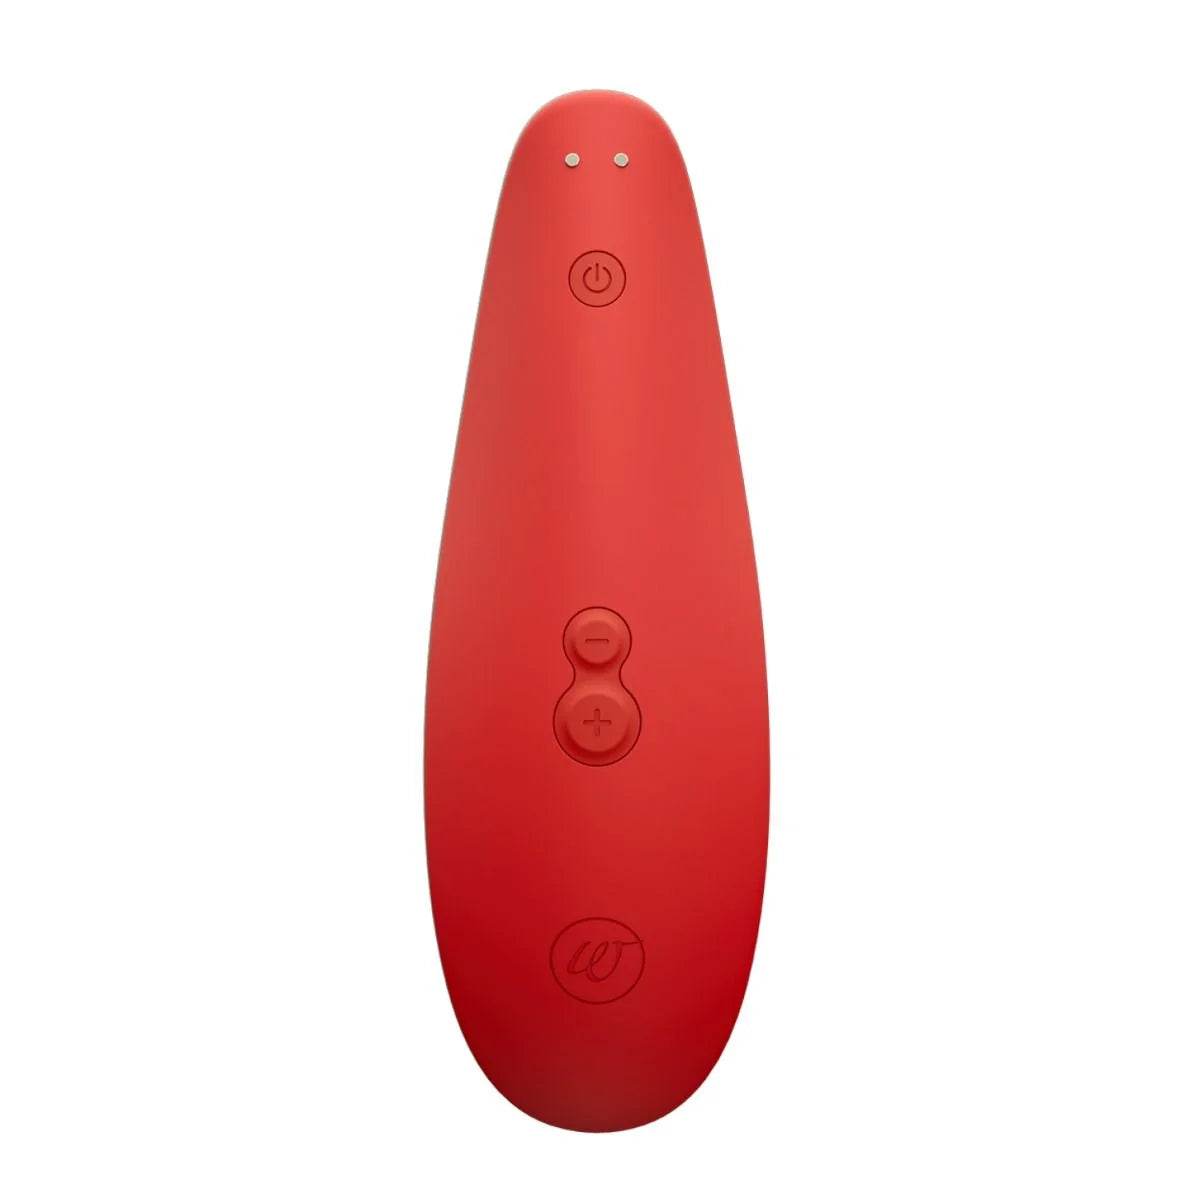 Womanizer Marilyn Monroe Special Edition Classic 2 Vivid Red